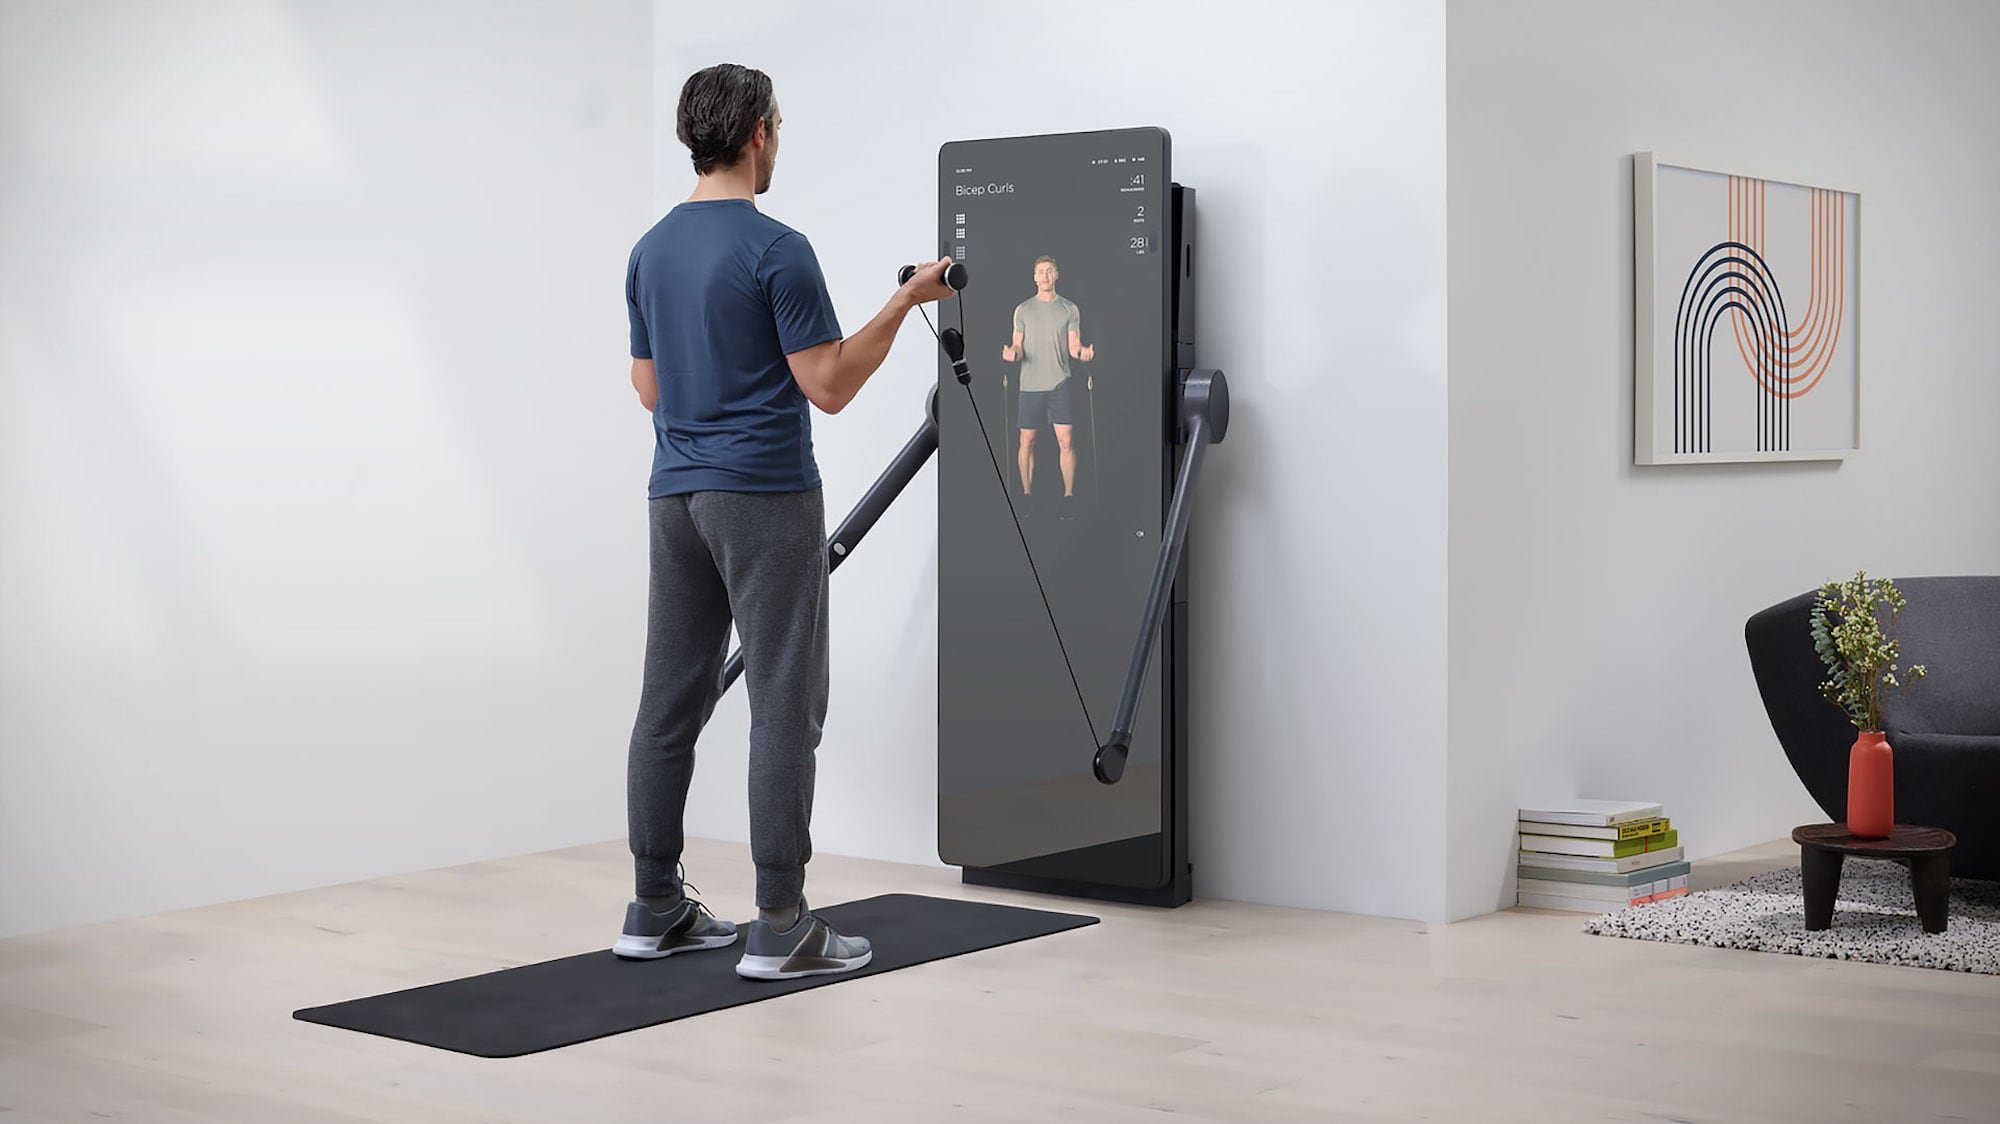 FORME Studio LIFT connected fitness mirror has a built-in weight training system